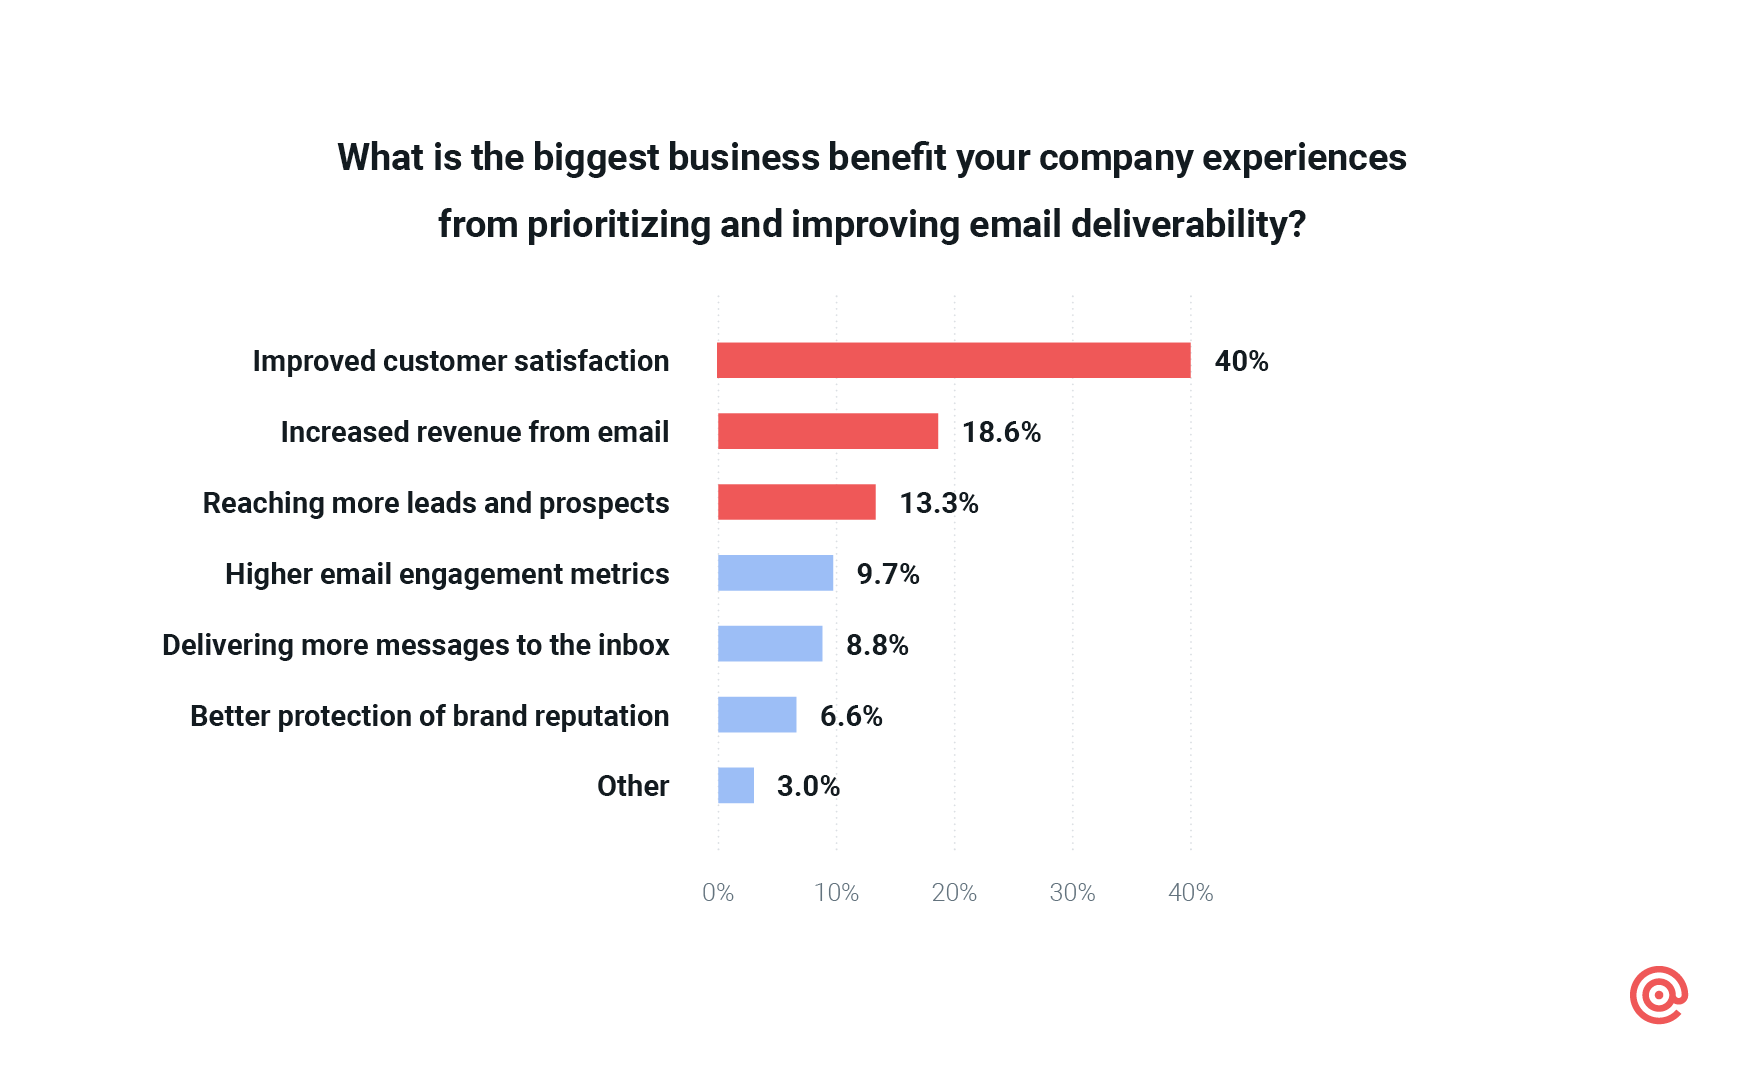 Bar graph shows 0% of senders say improved customer satisfaction is the biggest benefit of deliverability.